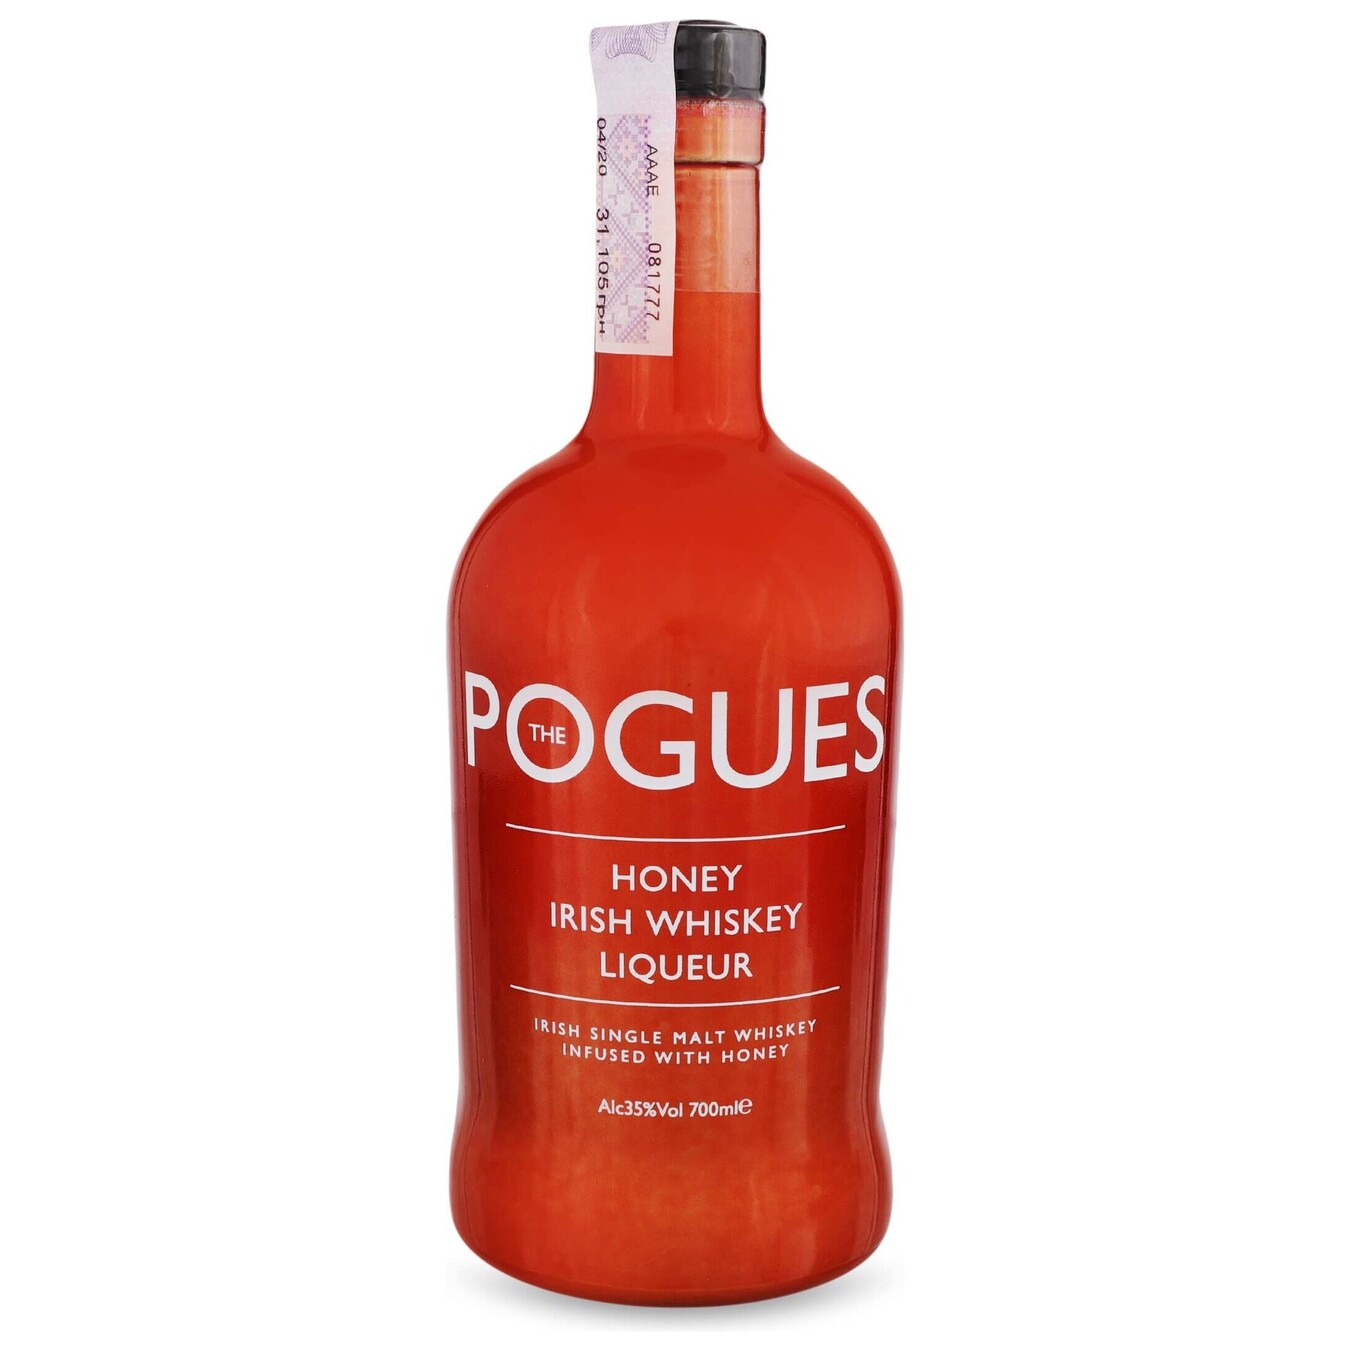 Whiskey The Pogues Honey 35% 0.7 l